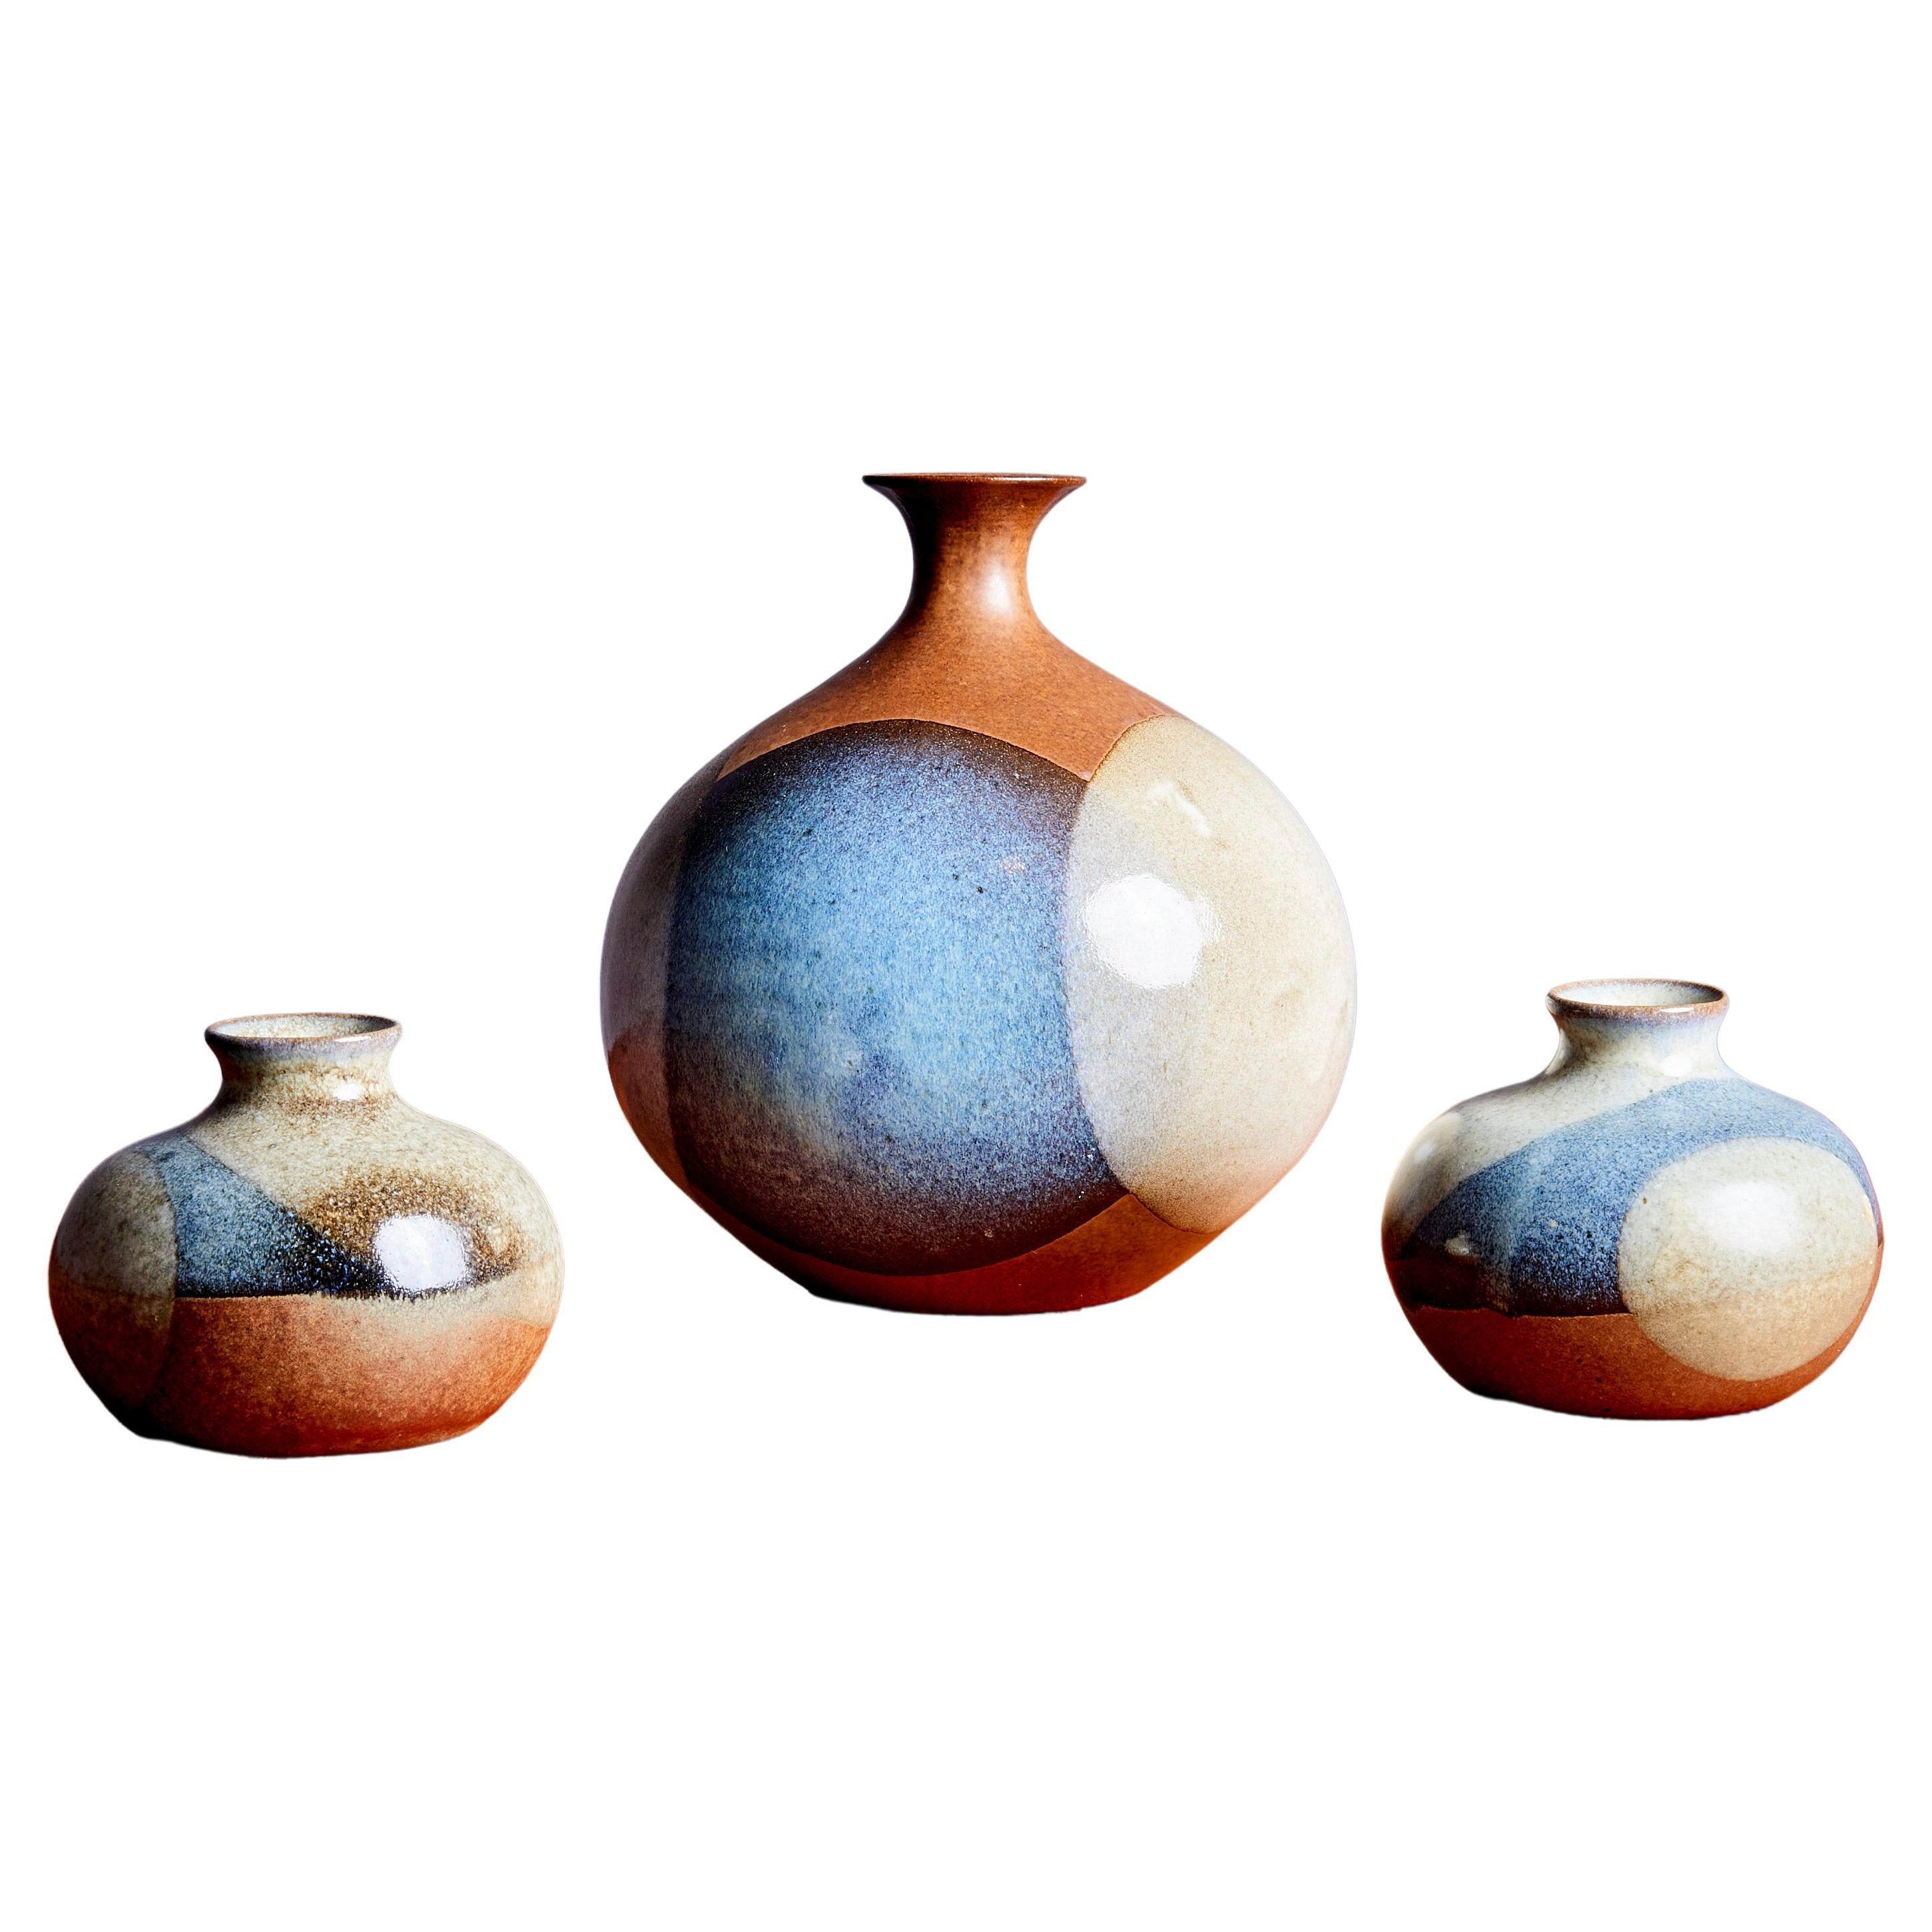 Robert Maxwell Set of 3 Ceramic Vases, USA - 1970s  For Sale